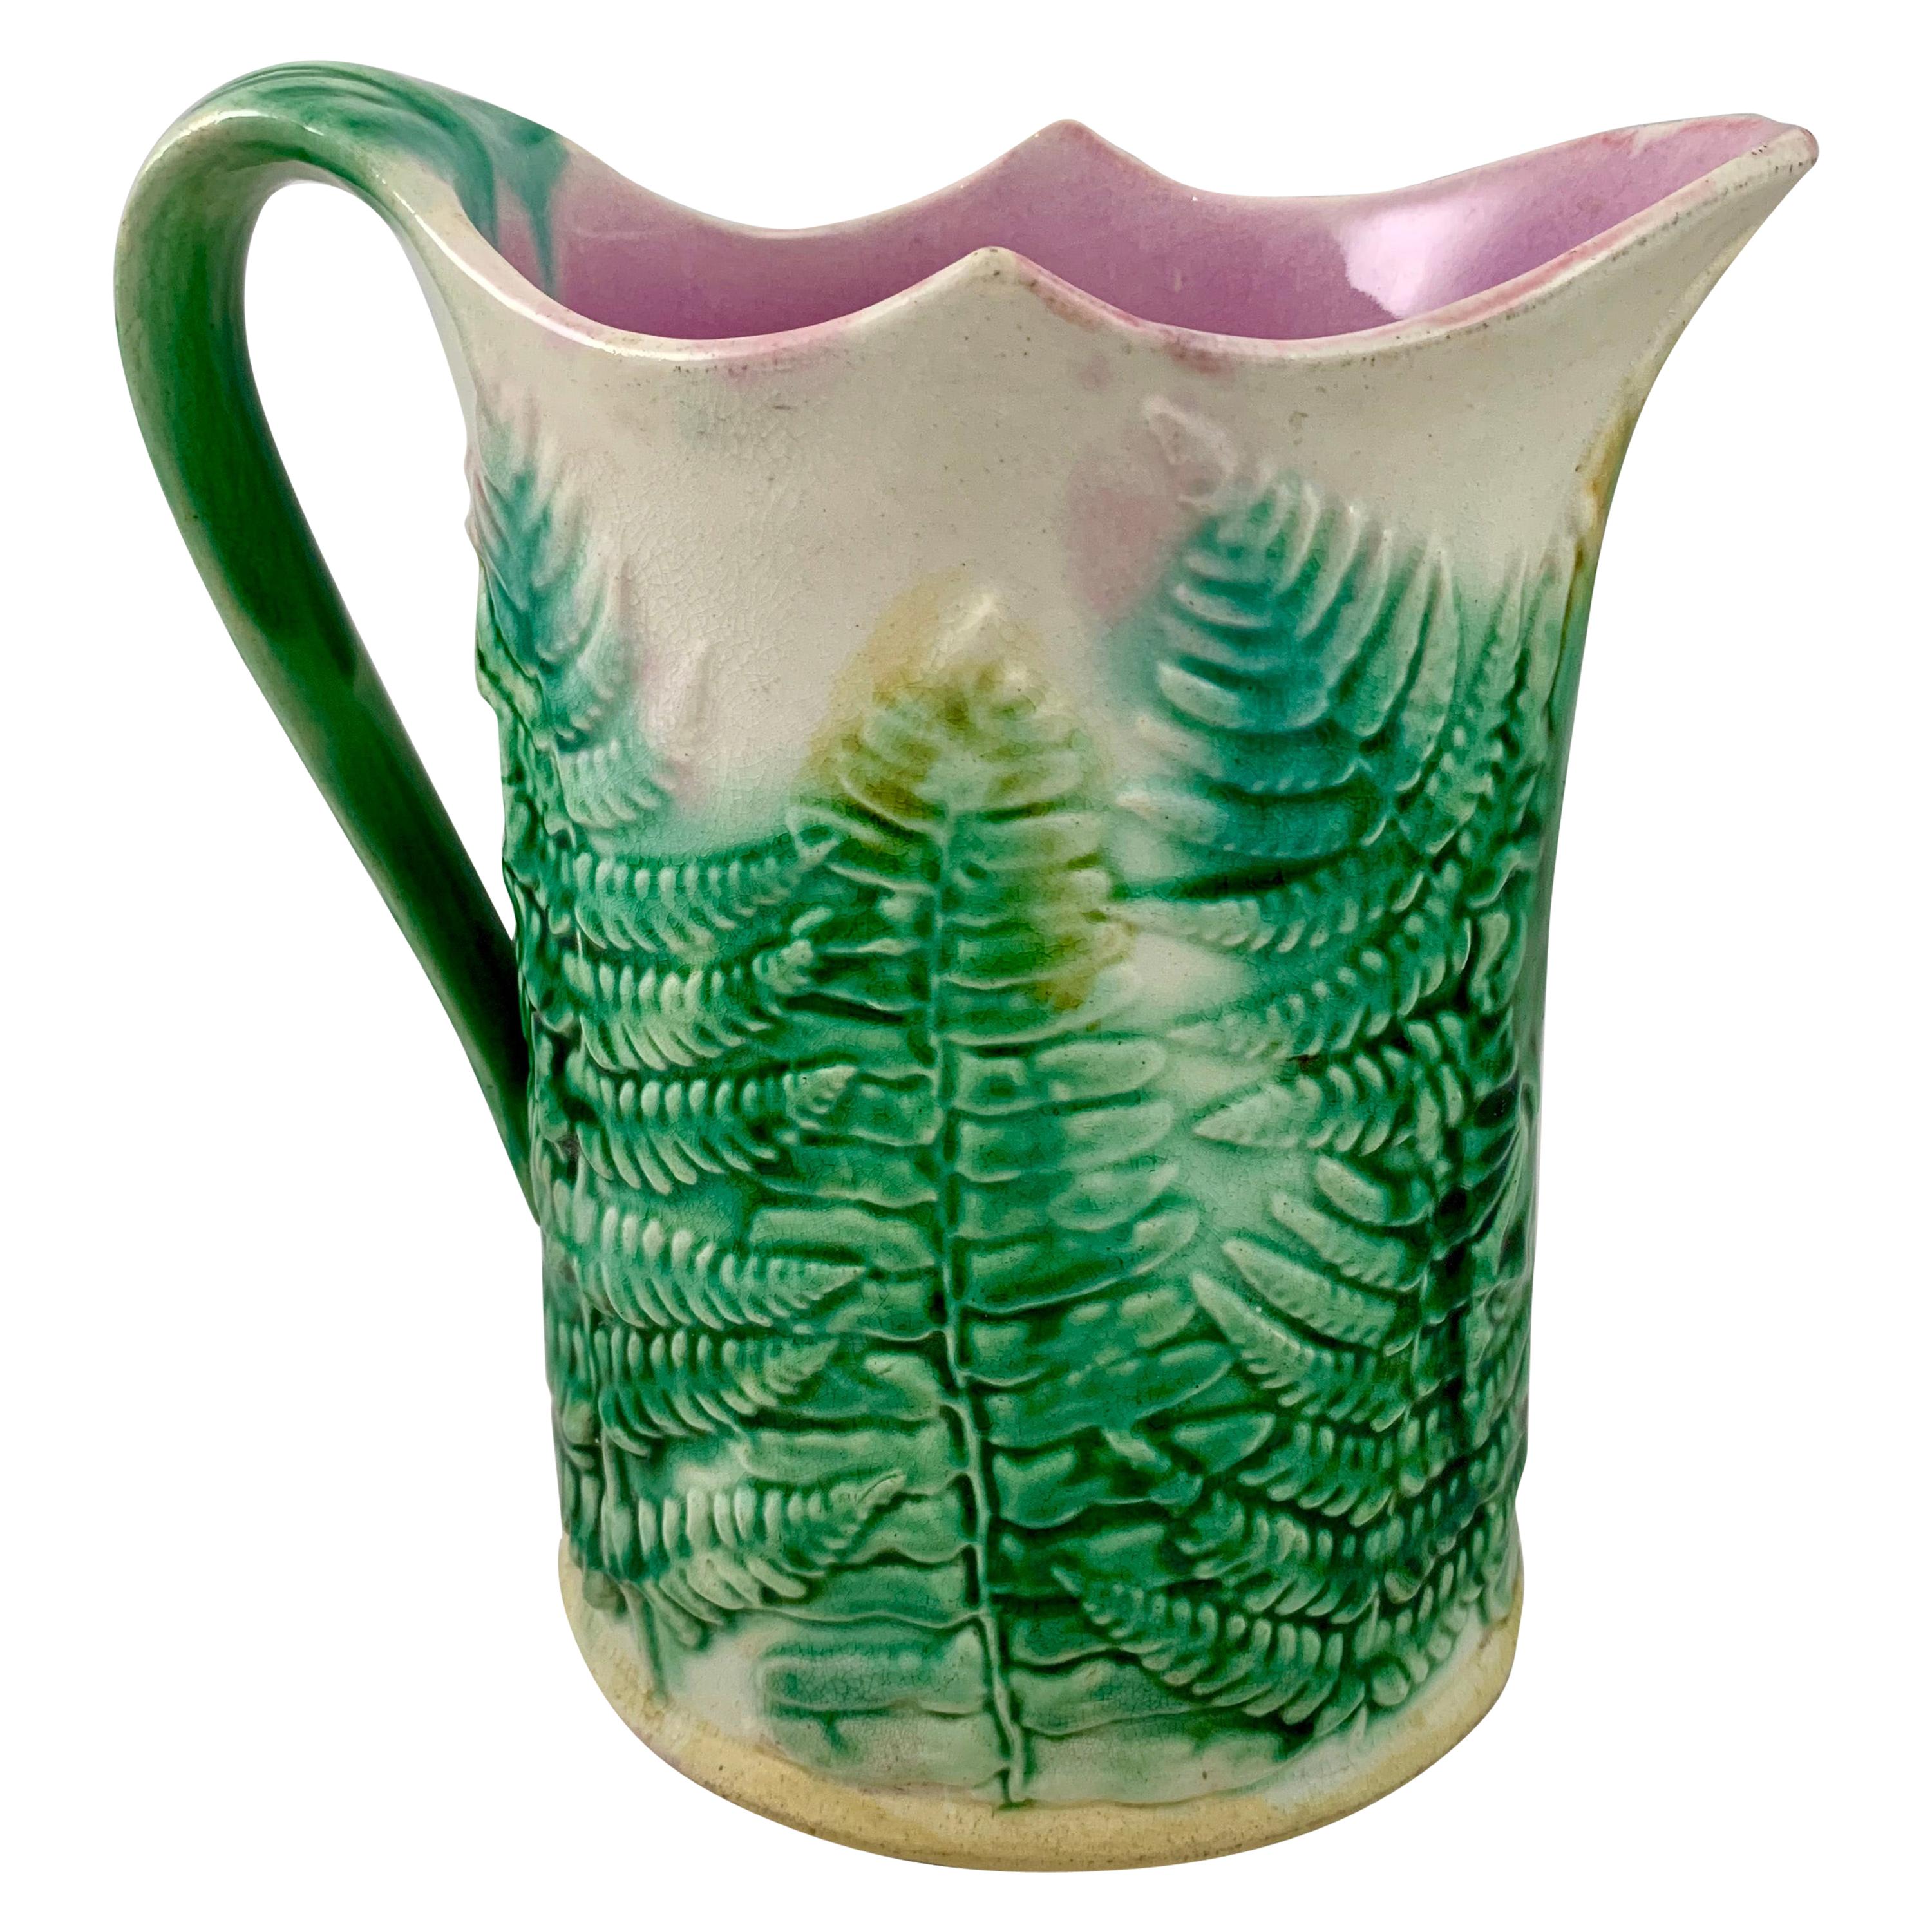 GS&H Etruscan American Majolica Green and White Fern Pitcher, circa 1880